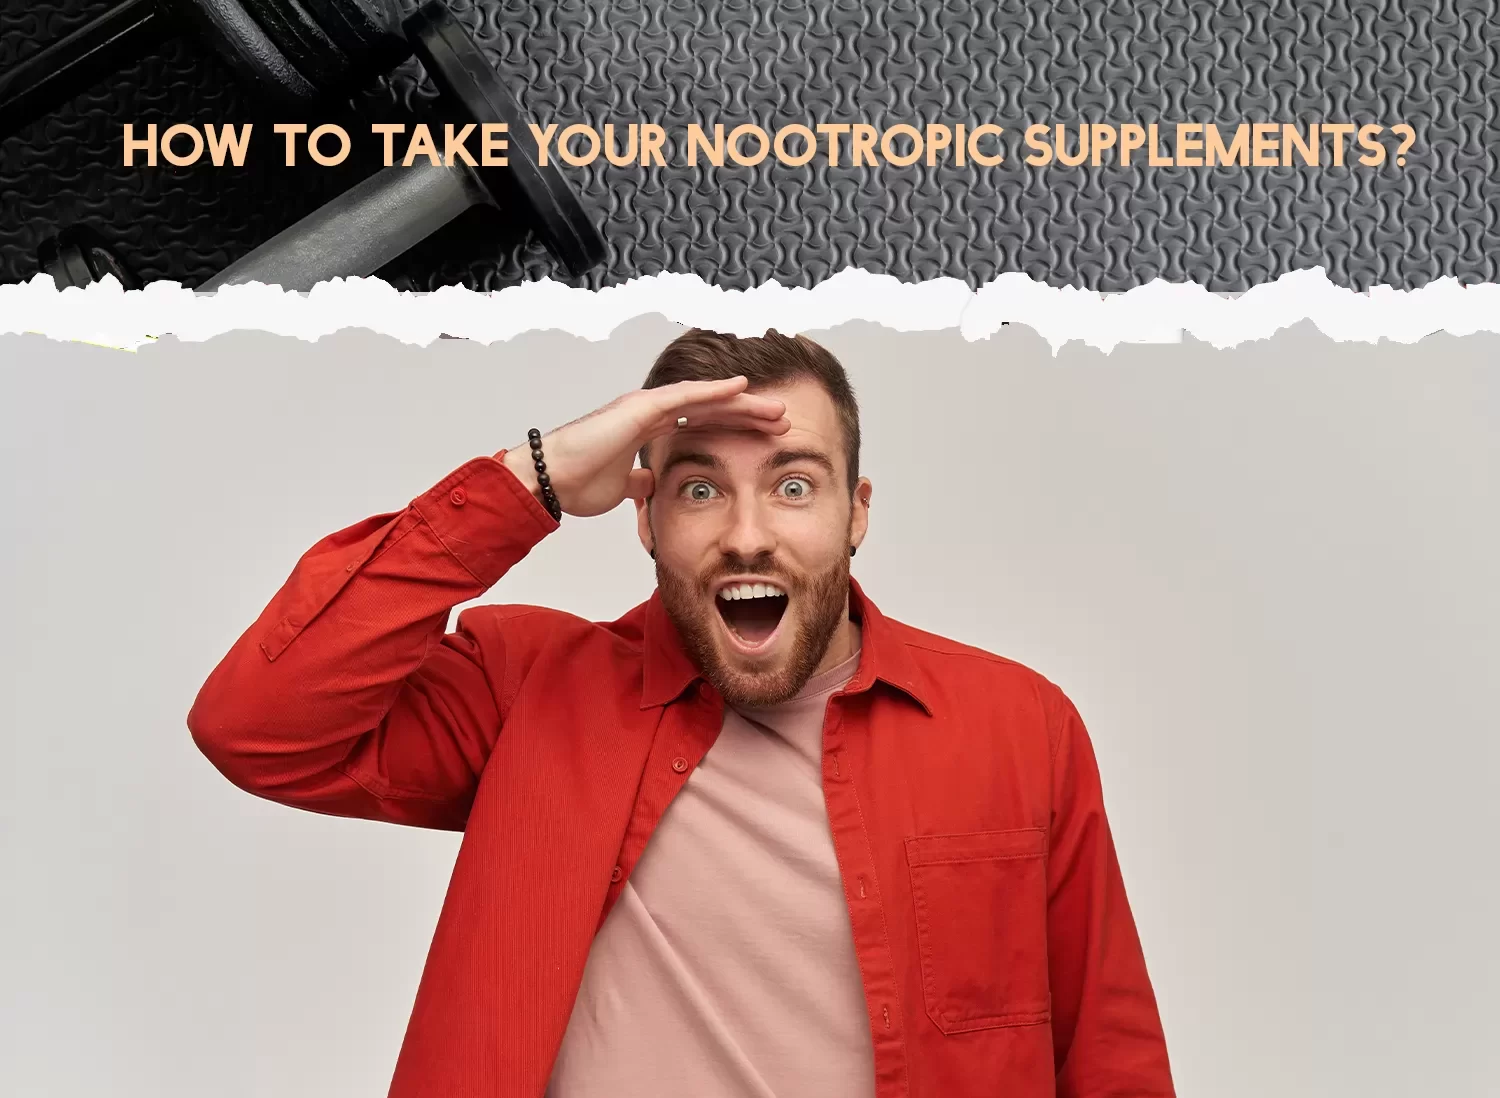 How to Take Nootropic Supplements